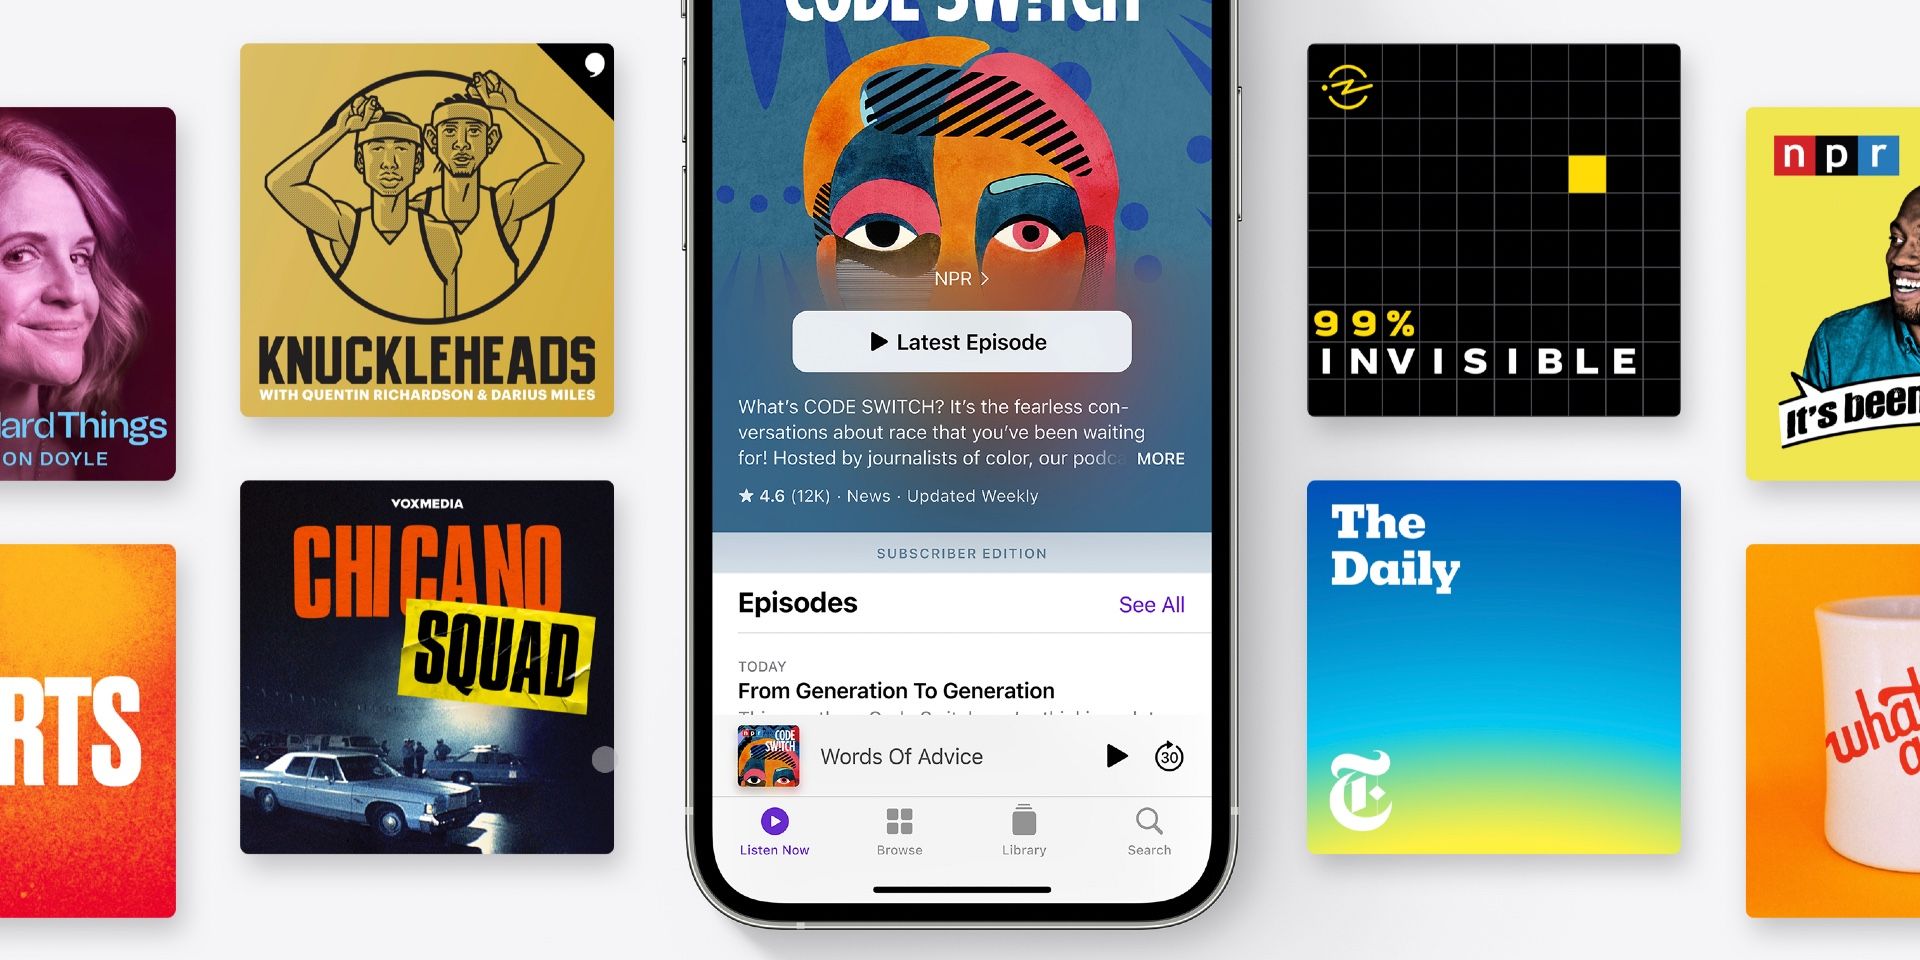 Promotional image of podcast app